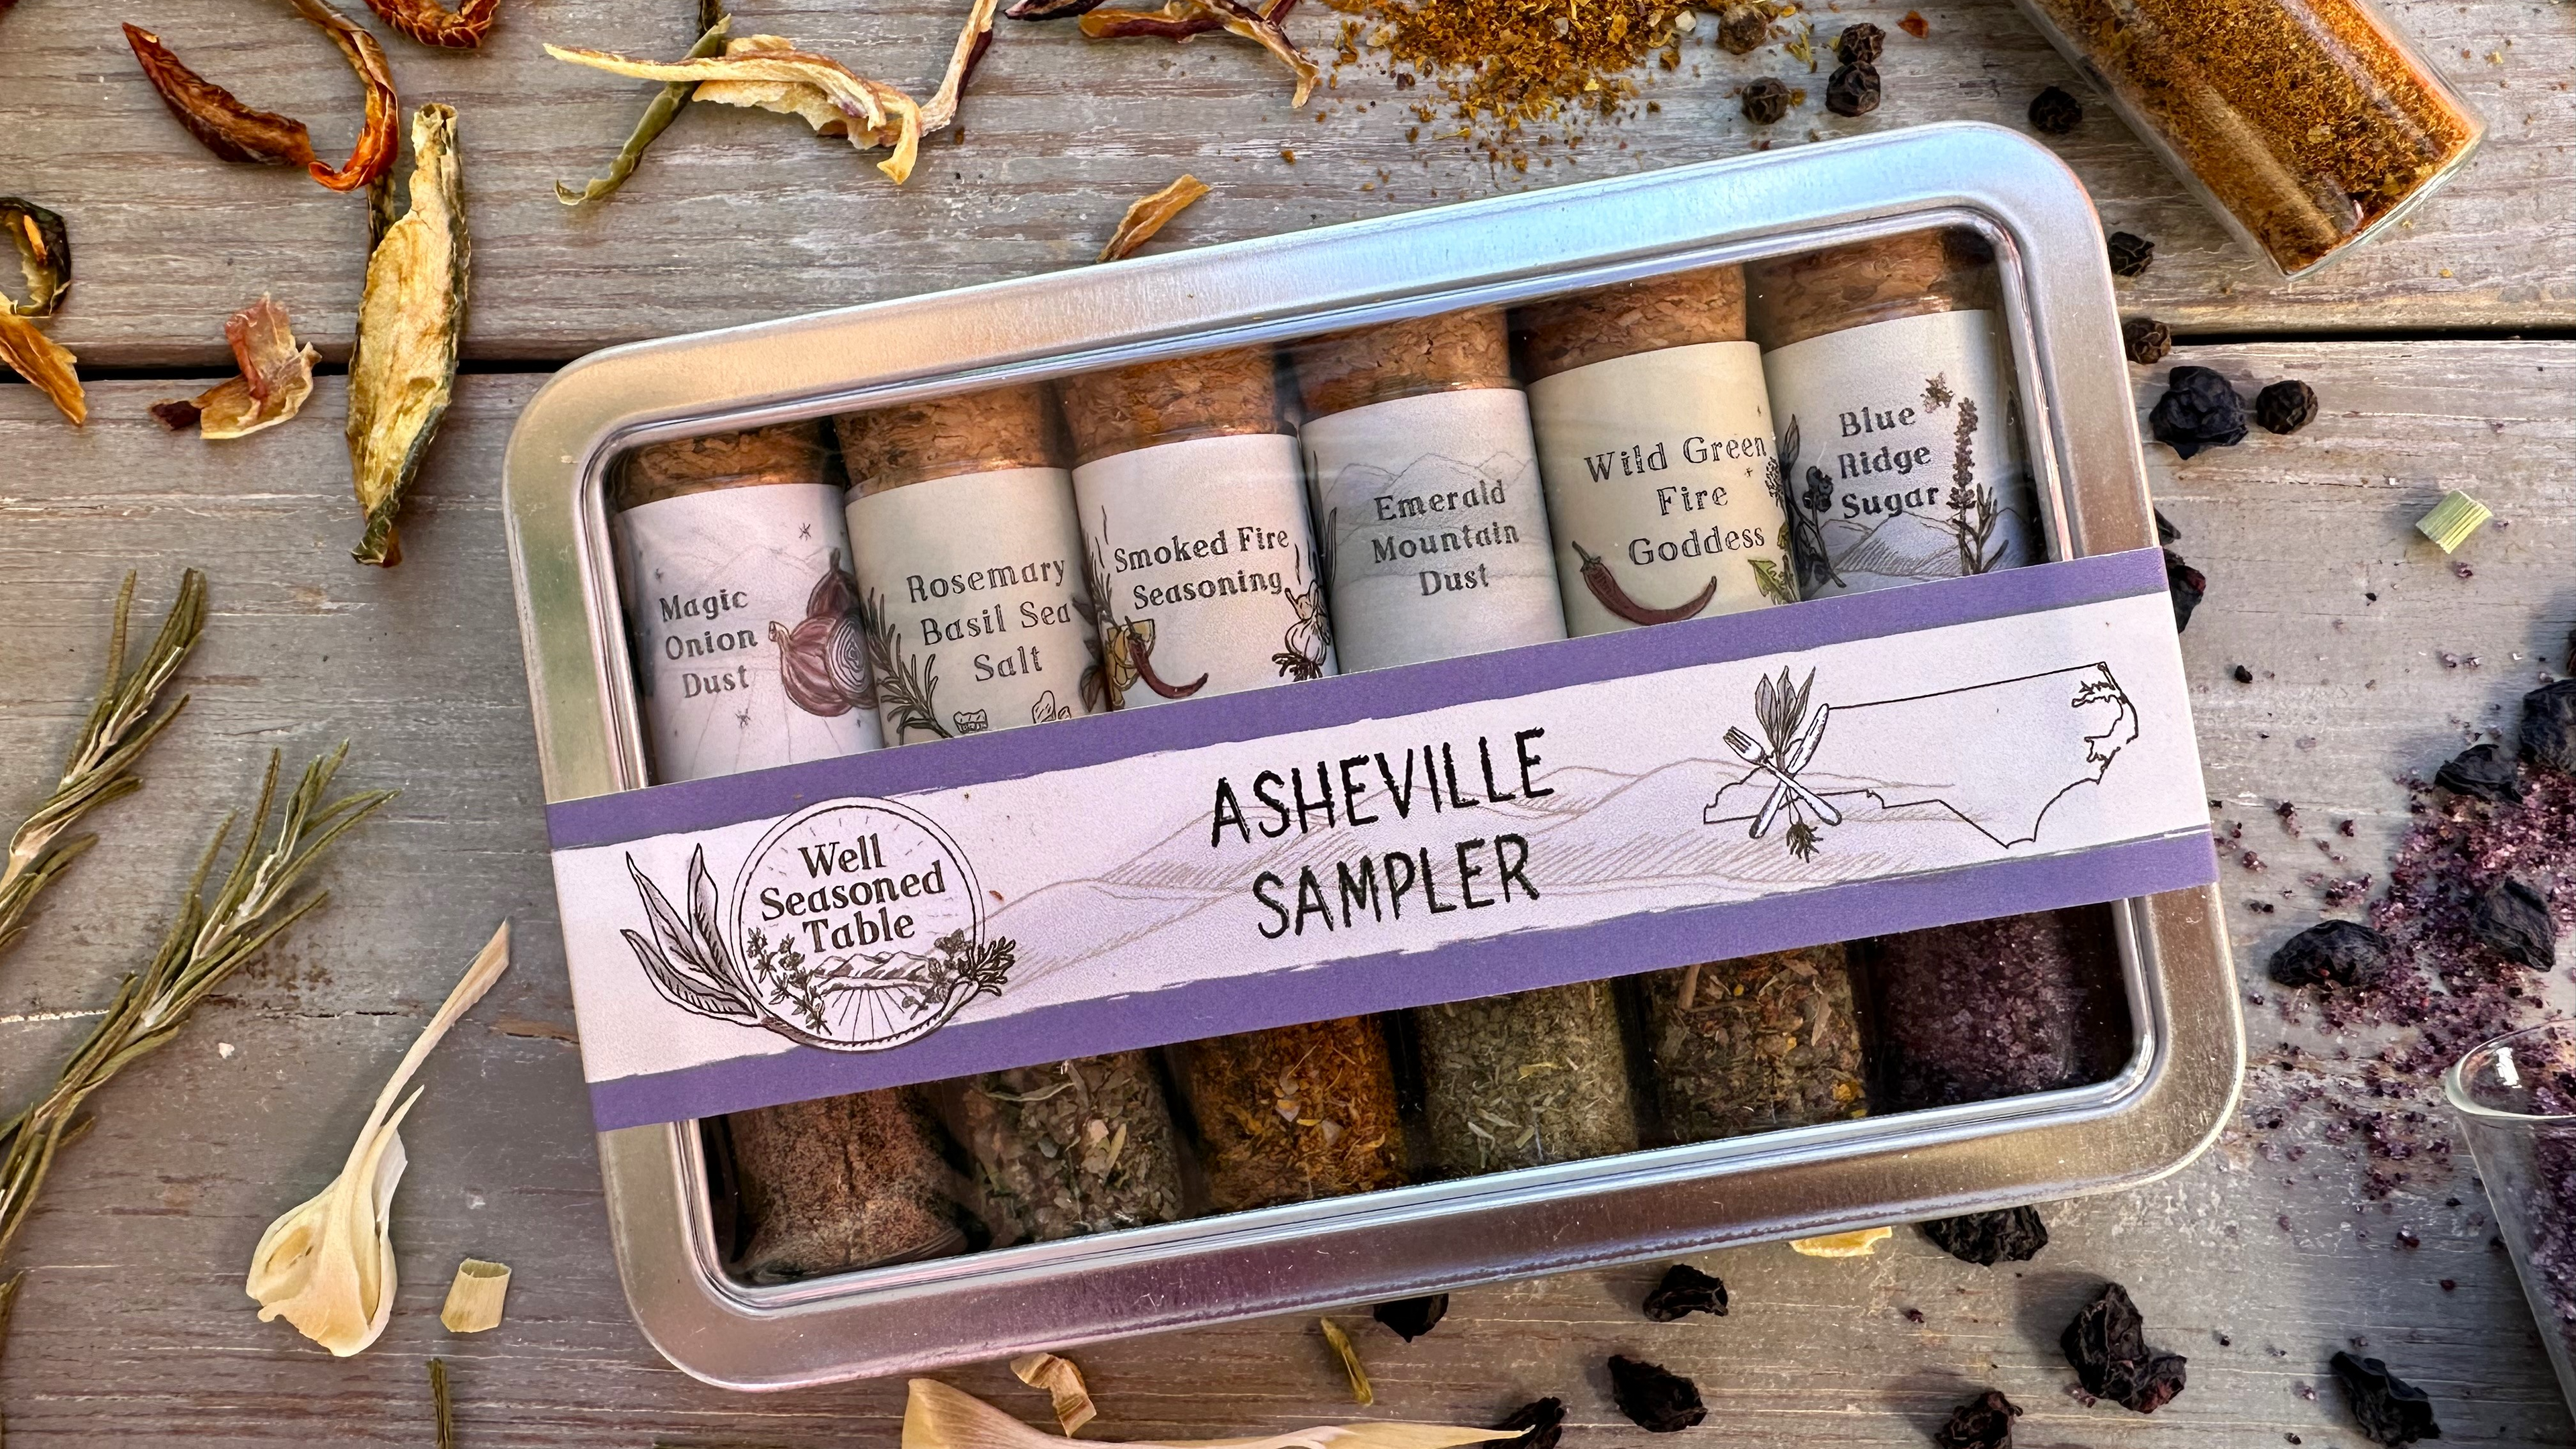 A sampler tin of vials of spices from Well Seasoned Table on a wooden background with organic dried spices and vegetables around it.